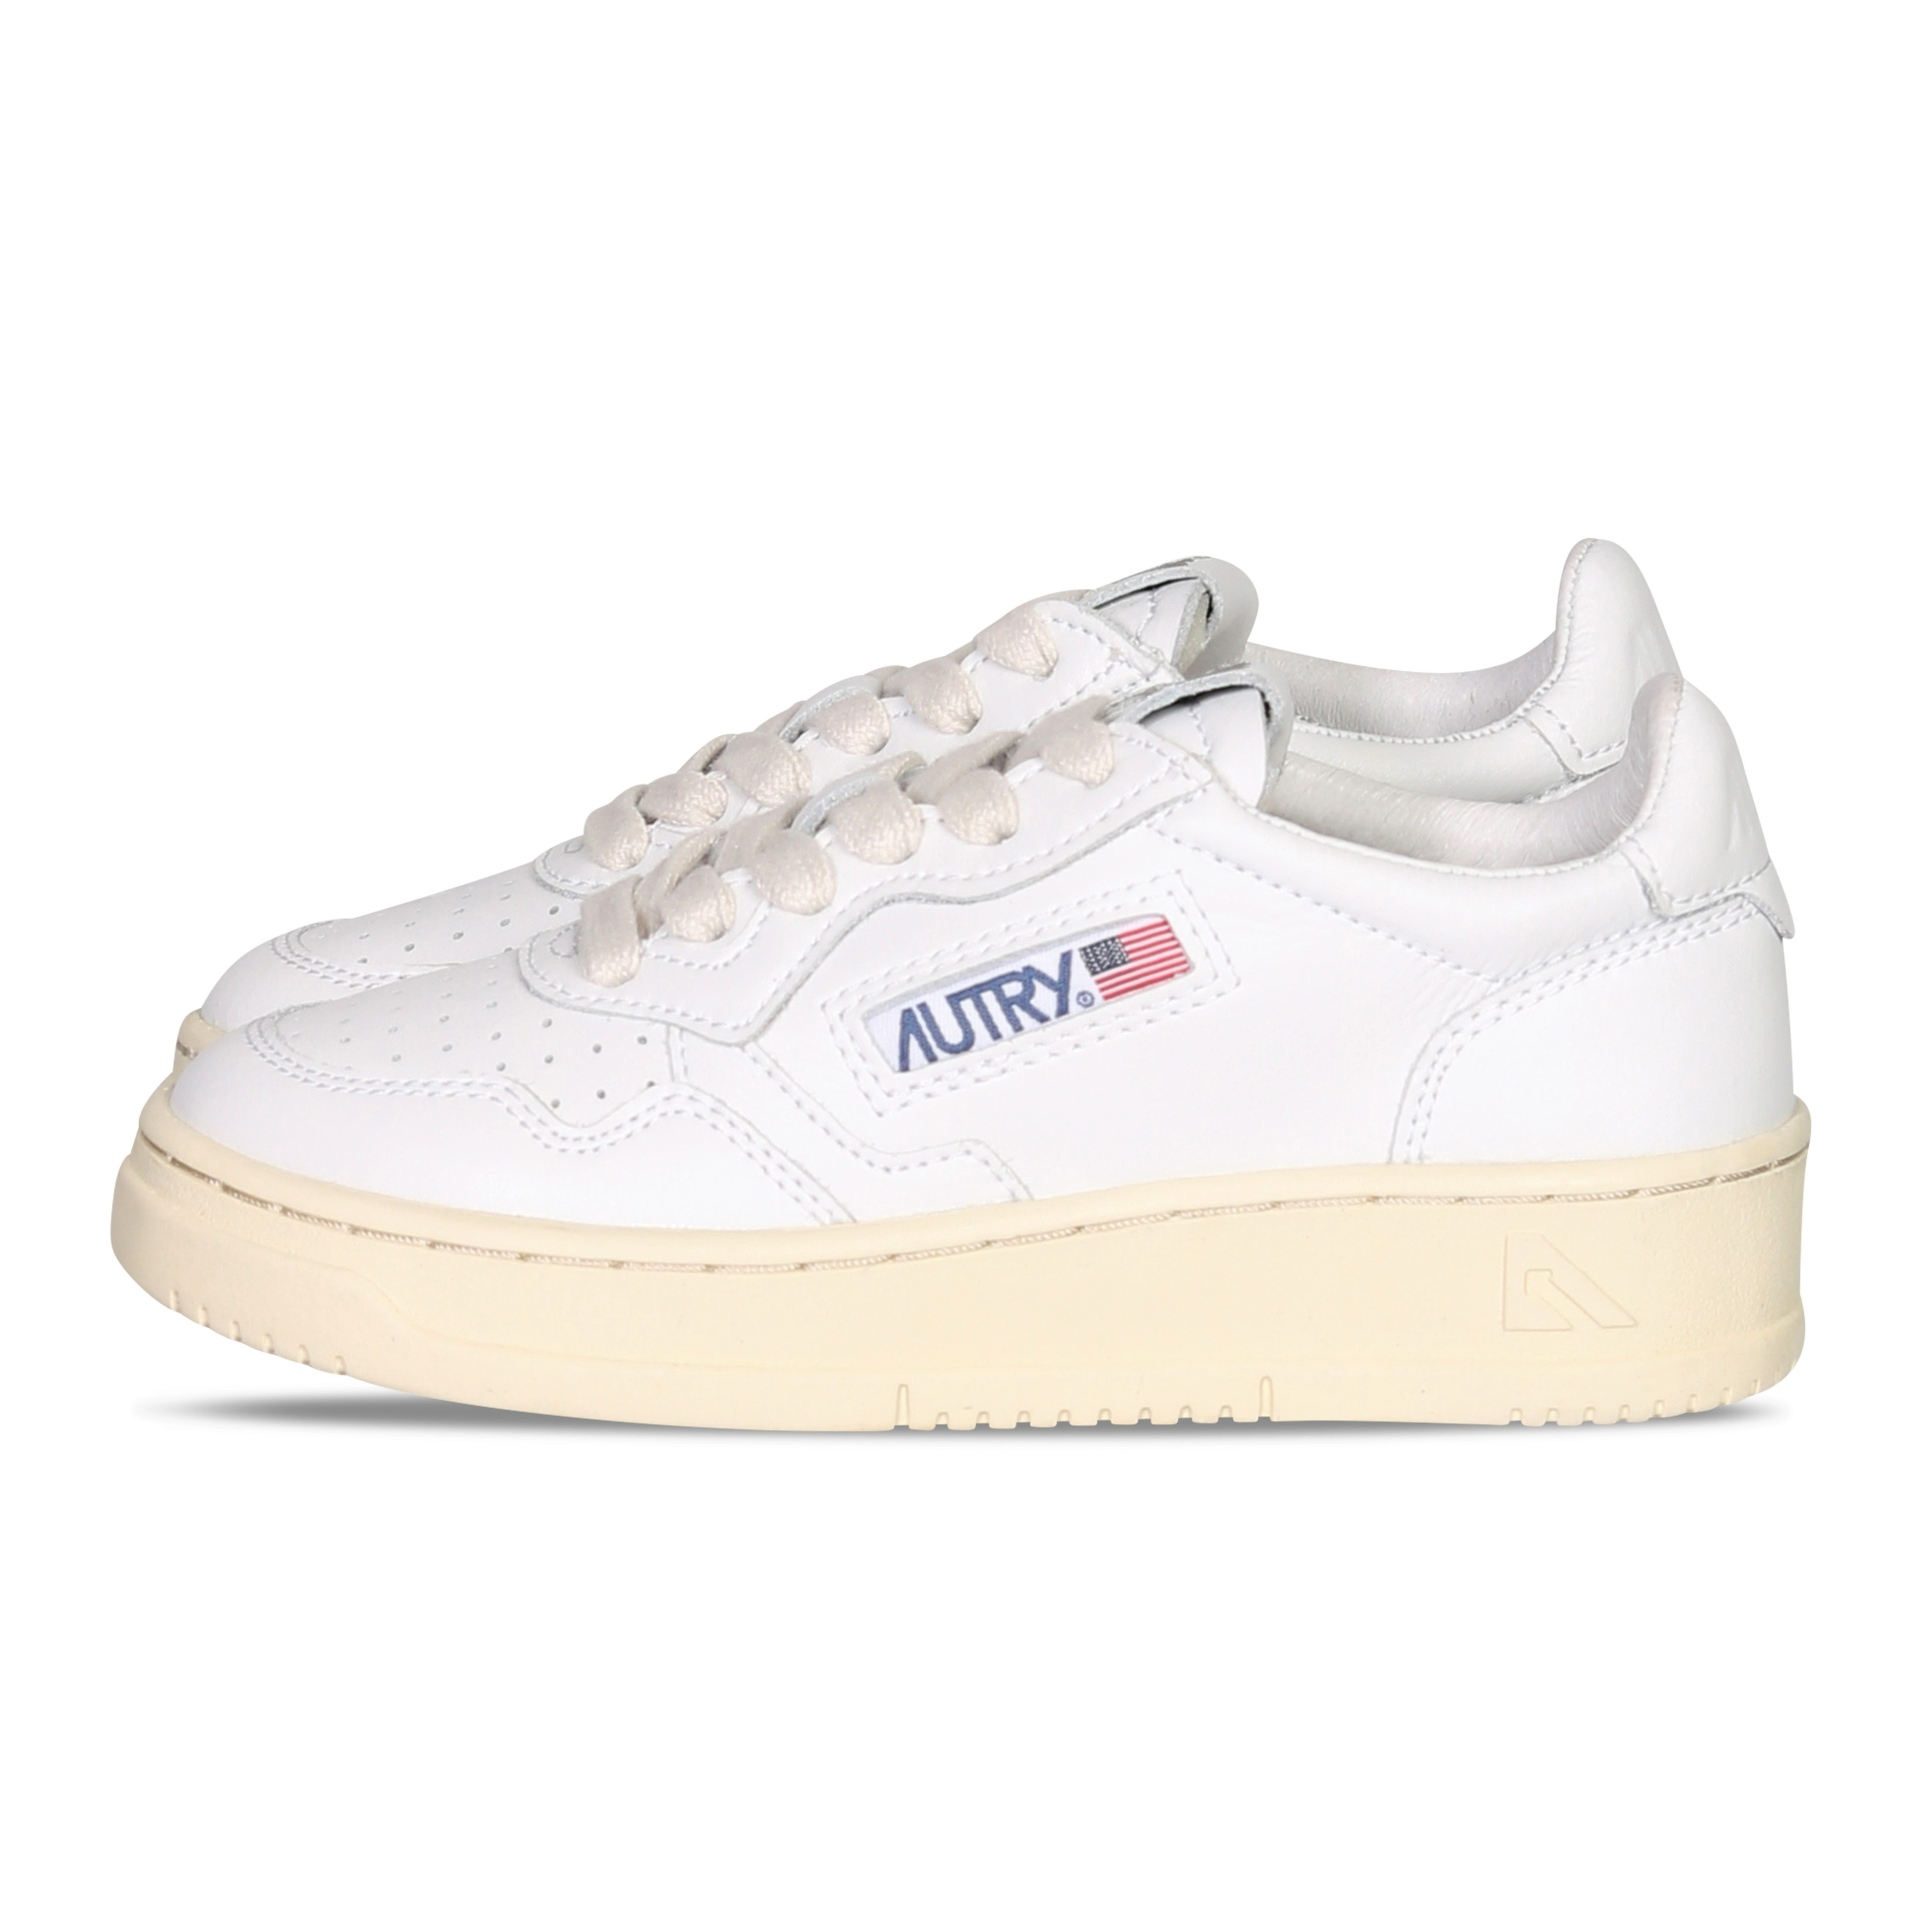 -KIDS- AUTRY ACTION SHOES Low Sneaker in White Draw Action People